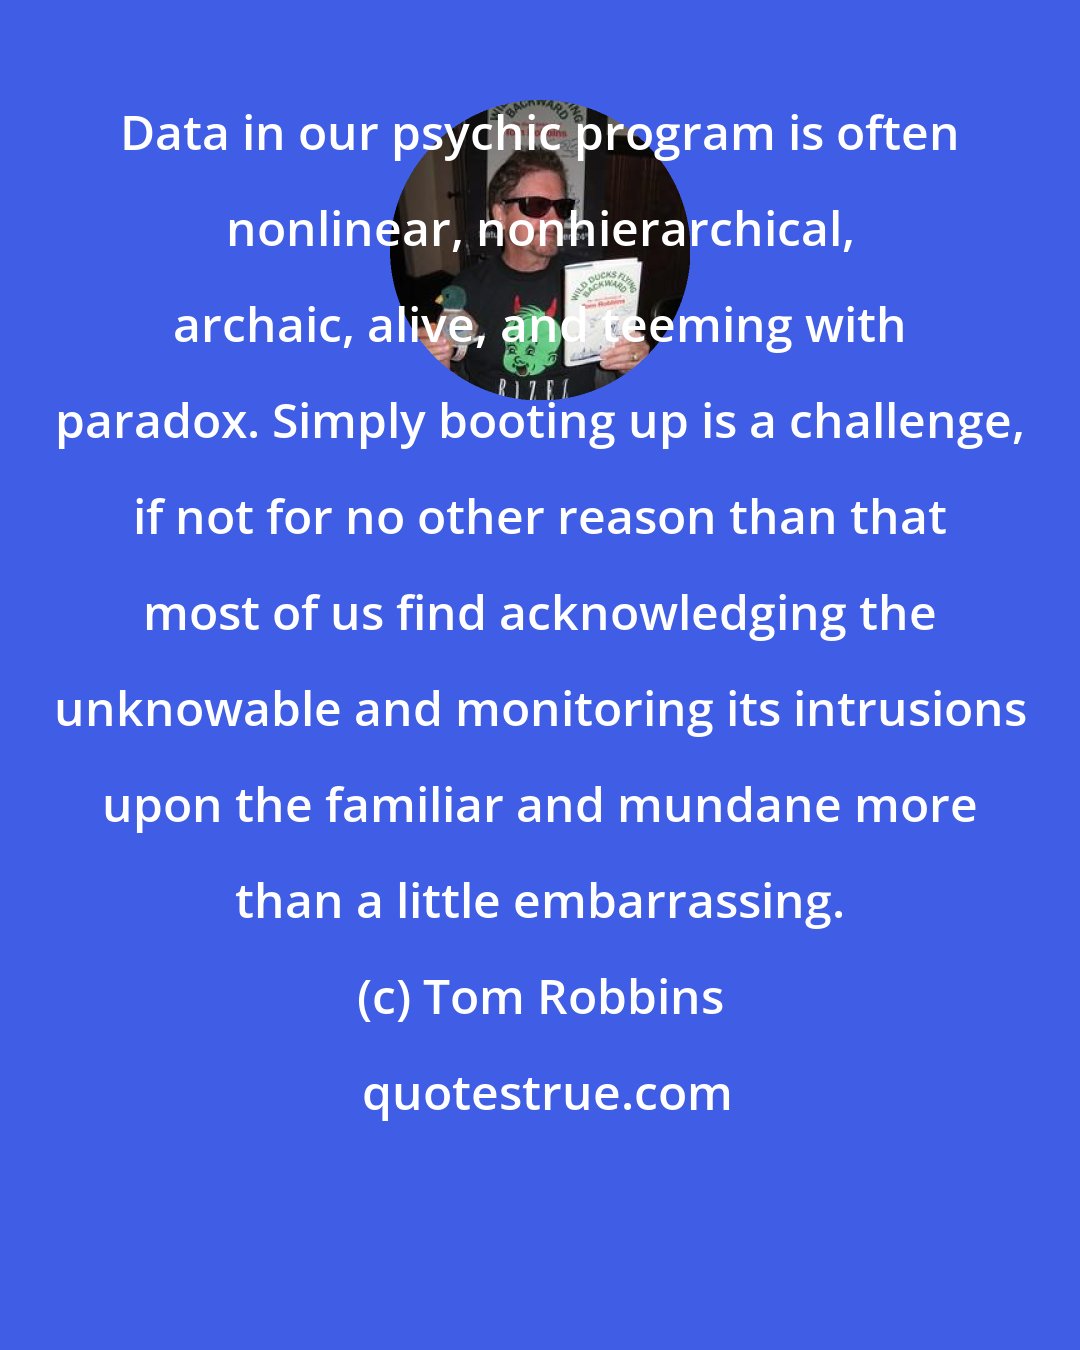 Tom Robbins: Data in our psychic program is often nonlinear, nonhierarchical, archaic, alive, and teeming with paradox. Simply booting up is a challenge, if not for no other reason than that most of us find acknowledging the unknowable and monitoring its intrusions upon the familiar and mundane more than a little embarrassing.